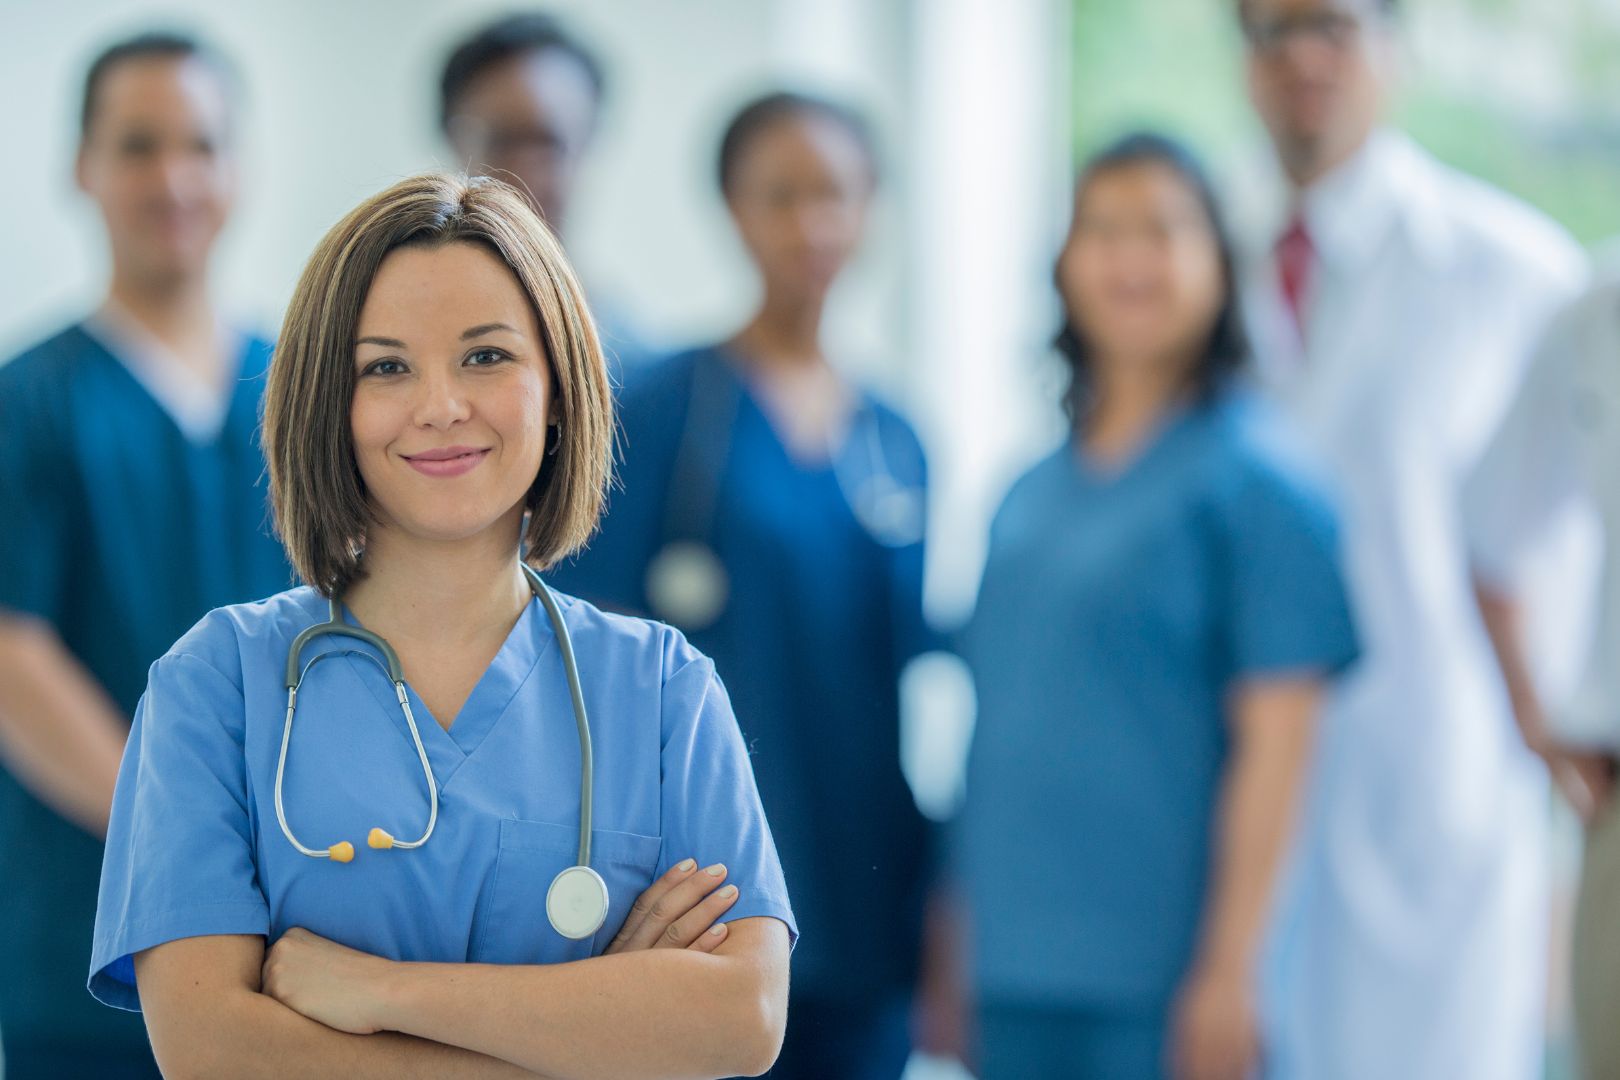  What Do New Nurses Struggle With The Most?